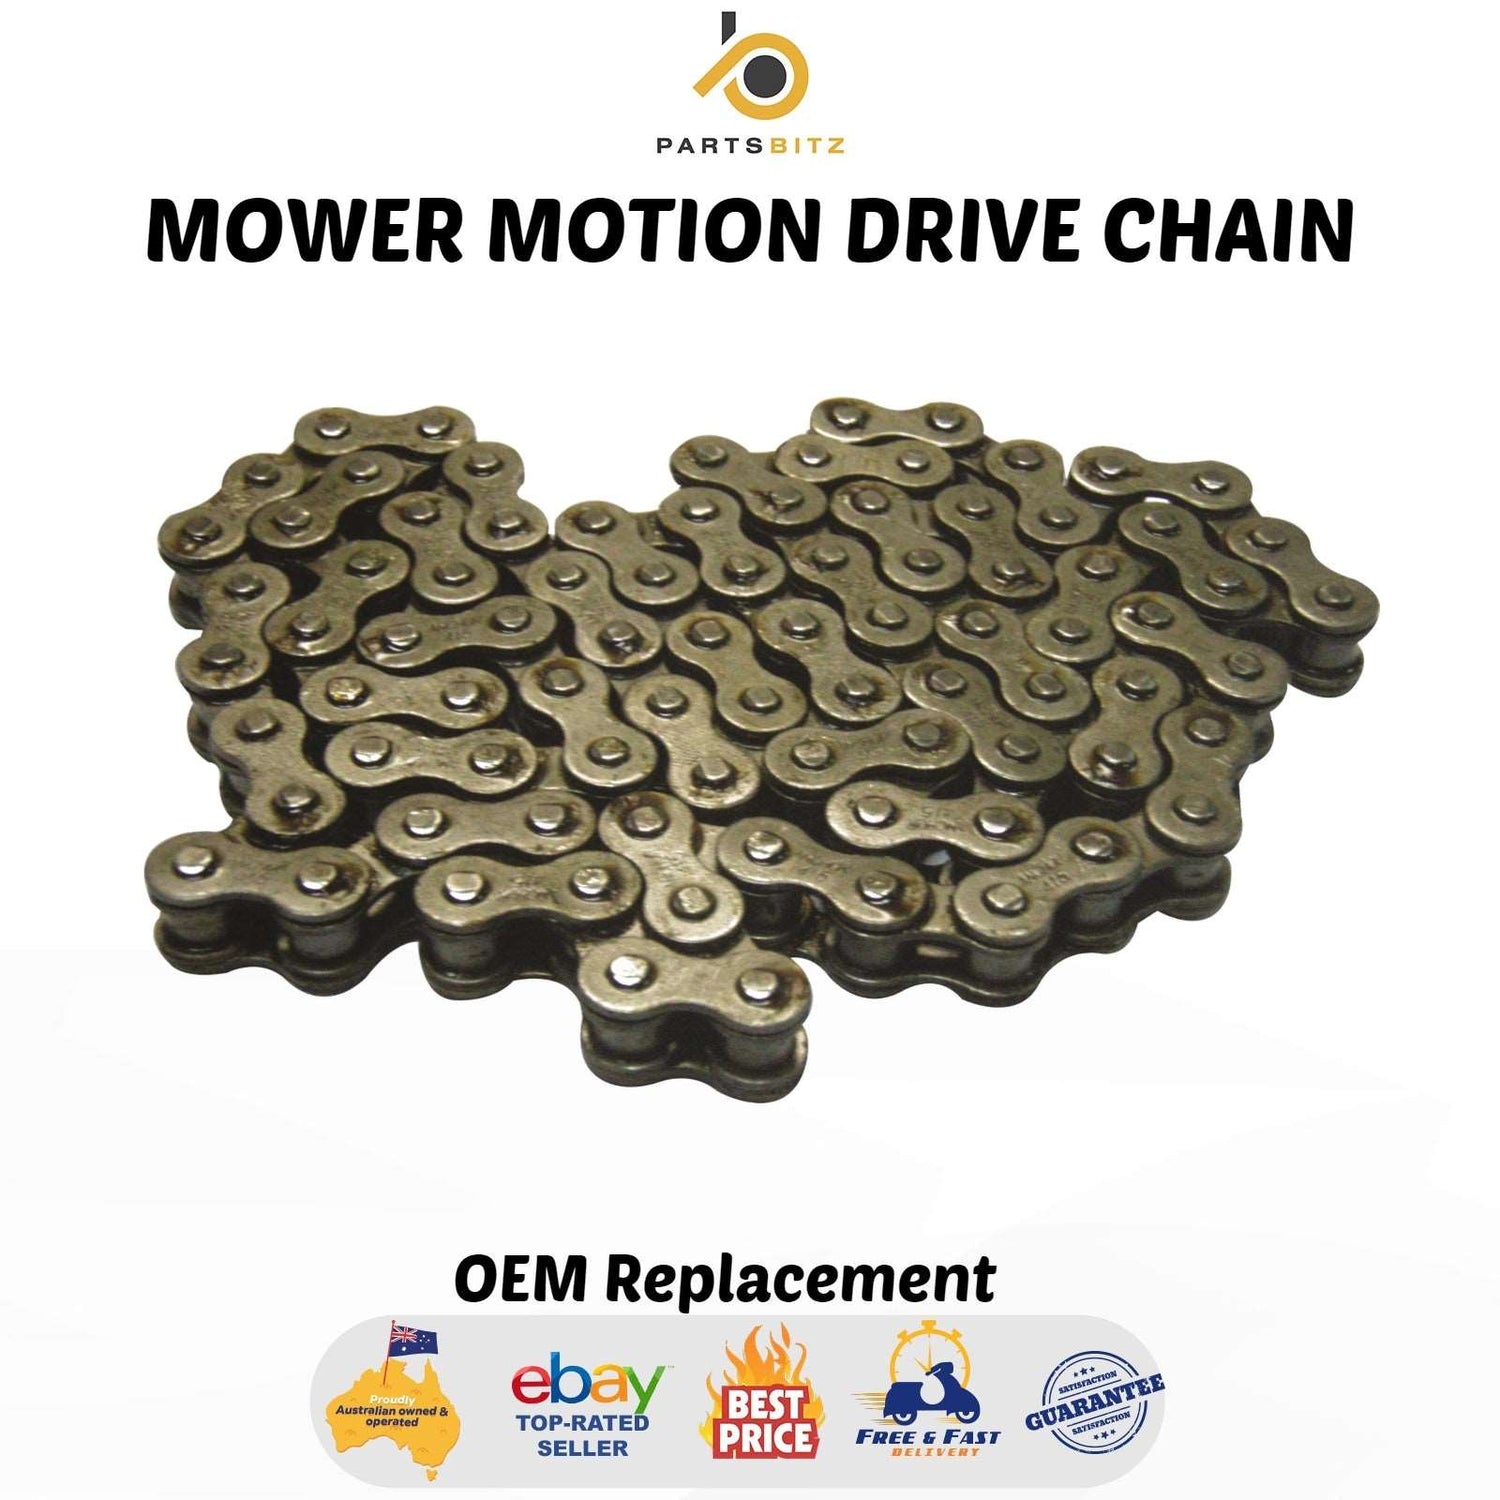 Genuine Cox Motion Drive Chain for Exclusive Cox Mowers Larger Chain 231901